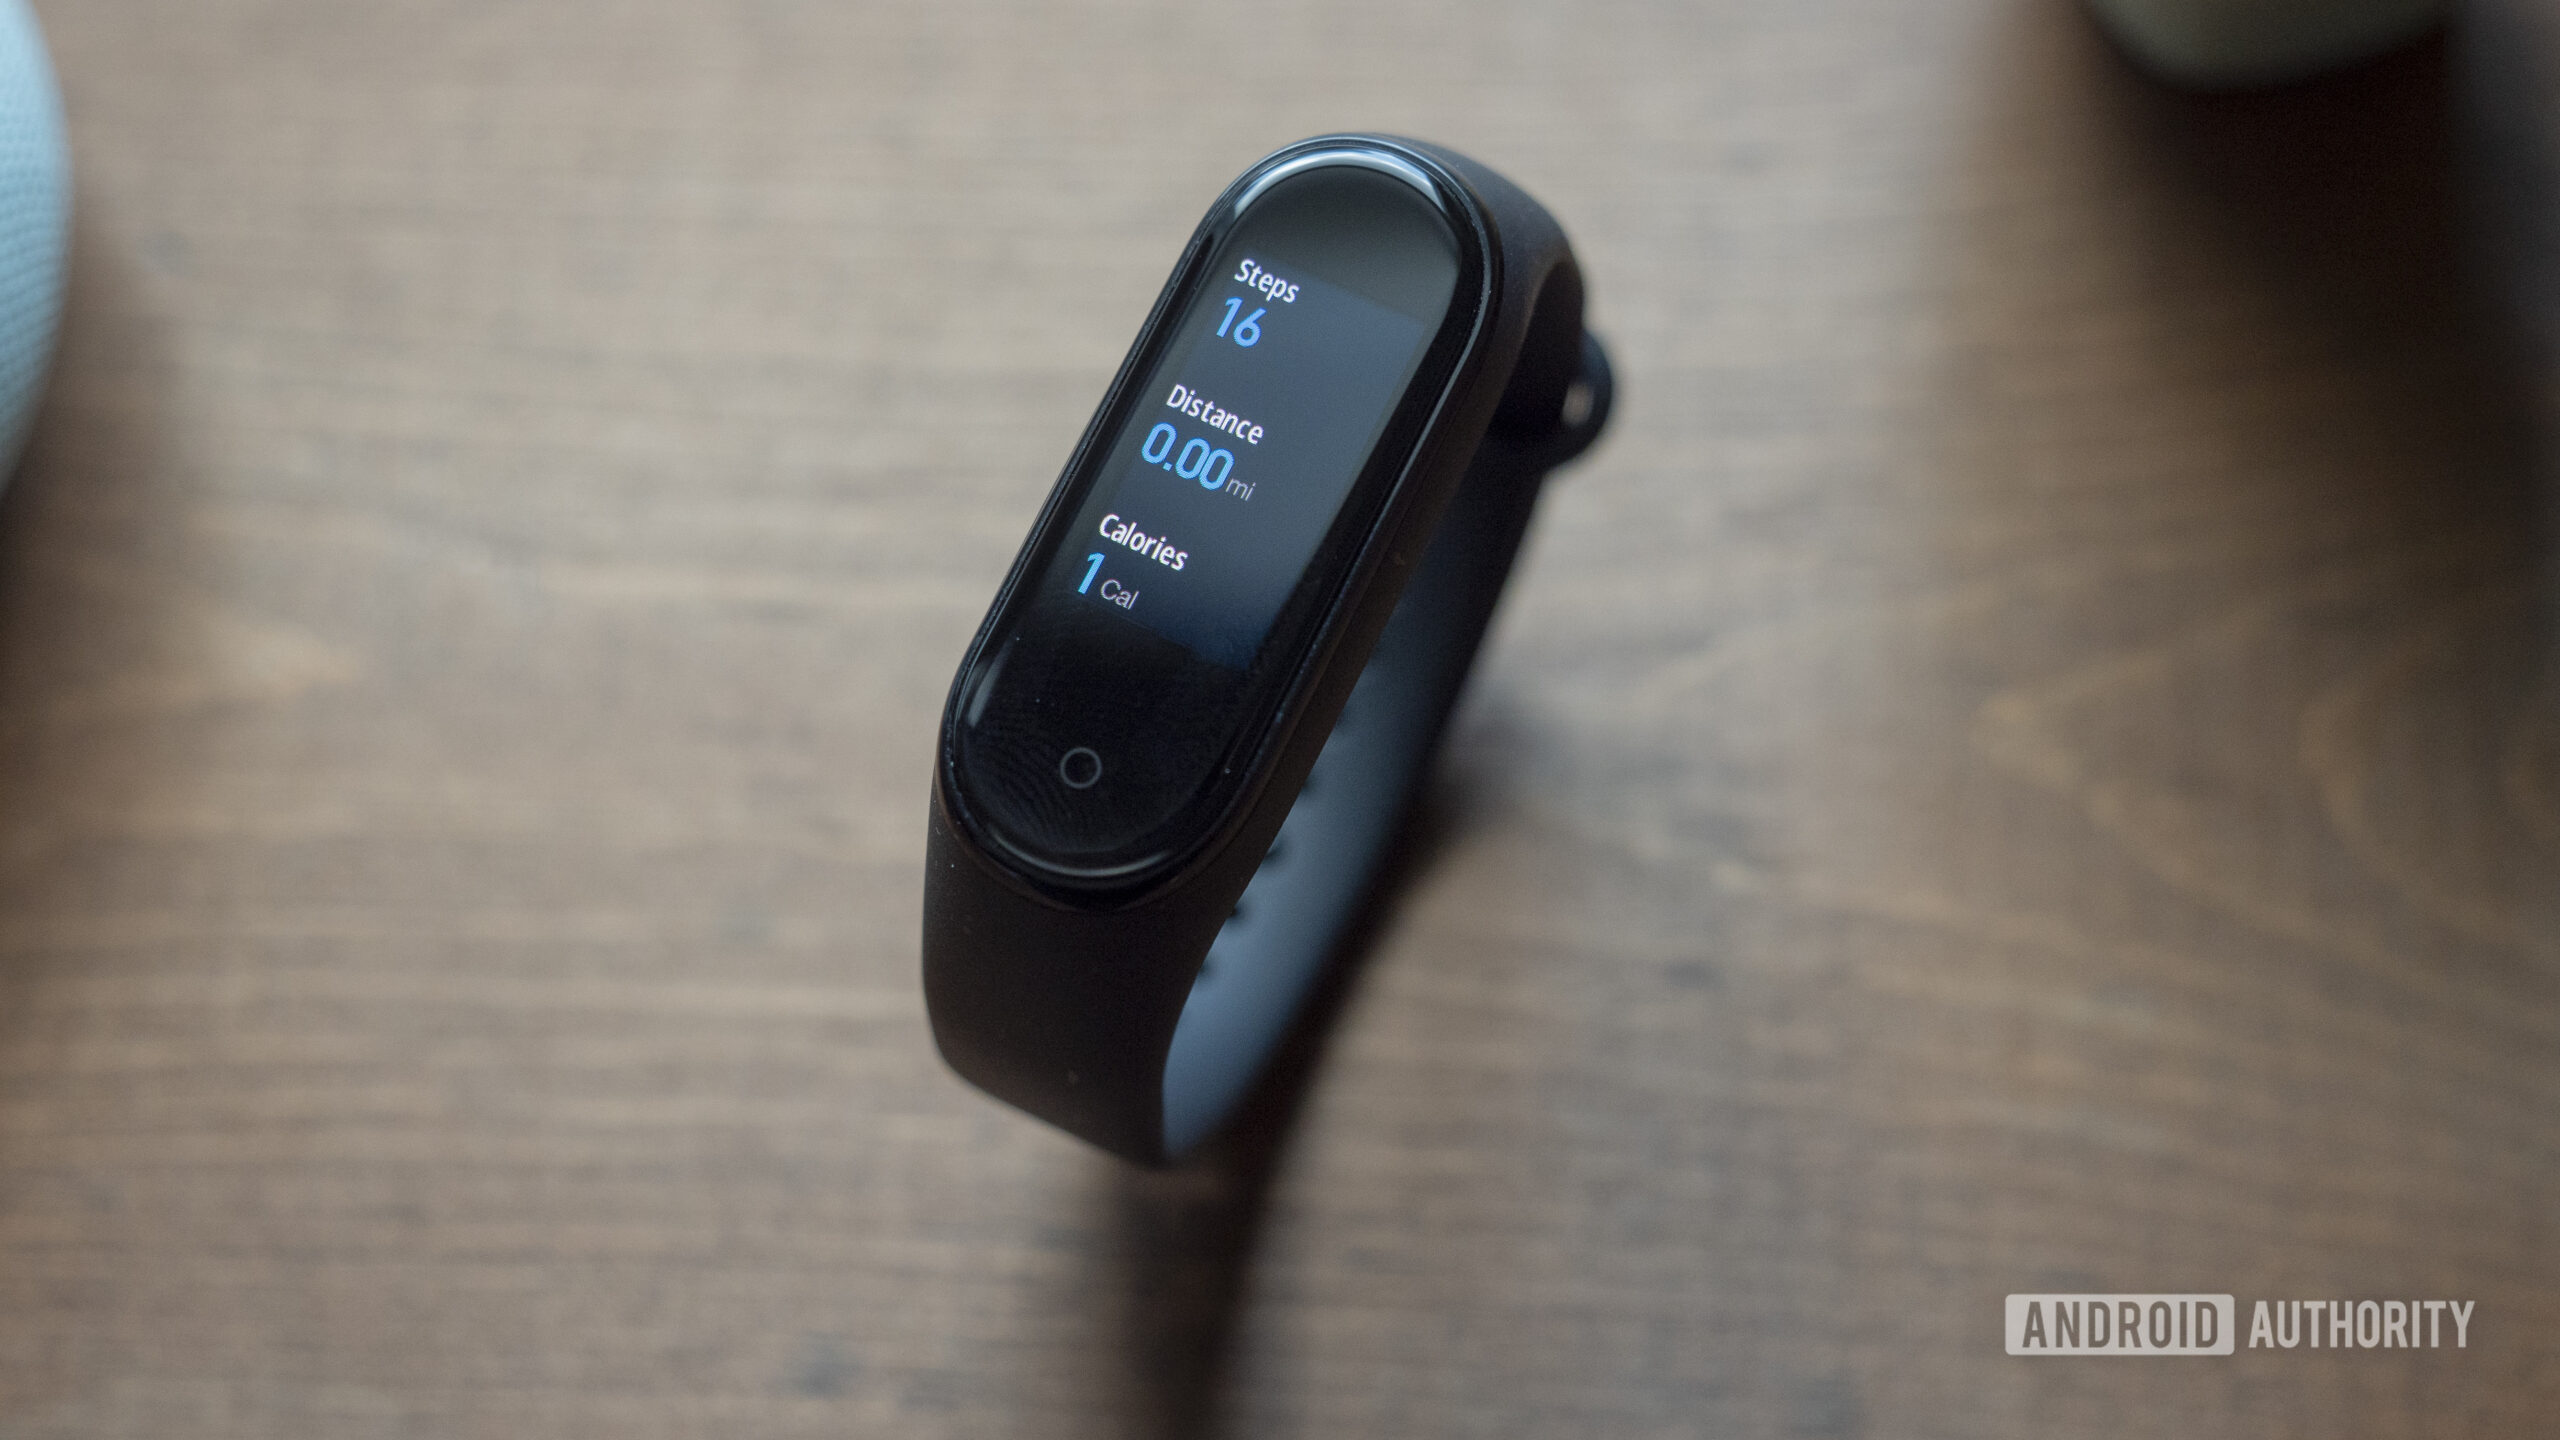 xiaomi mi band 4 review status steps daily activity